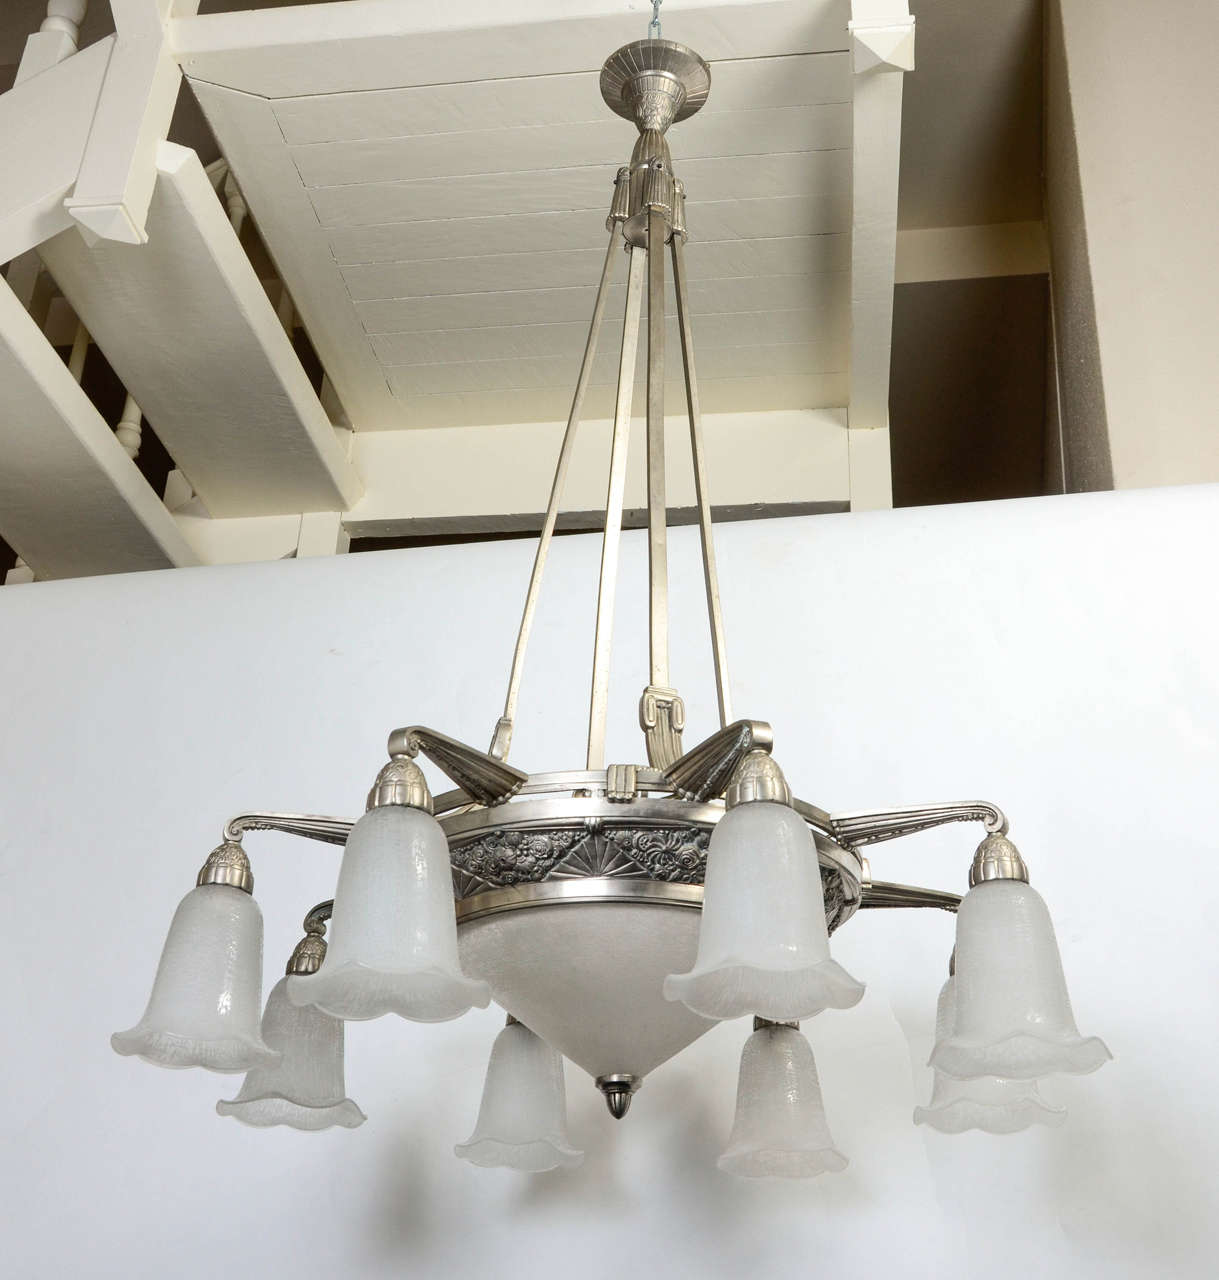 Important metal and glass chandelier, Daum, 1925.
High brushed steel structure with decorative flowers geometric design with eight lighting arms ended with white glass cups. Central glass cup. 
The glass pieces are signed 